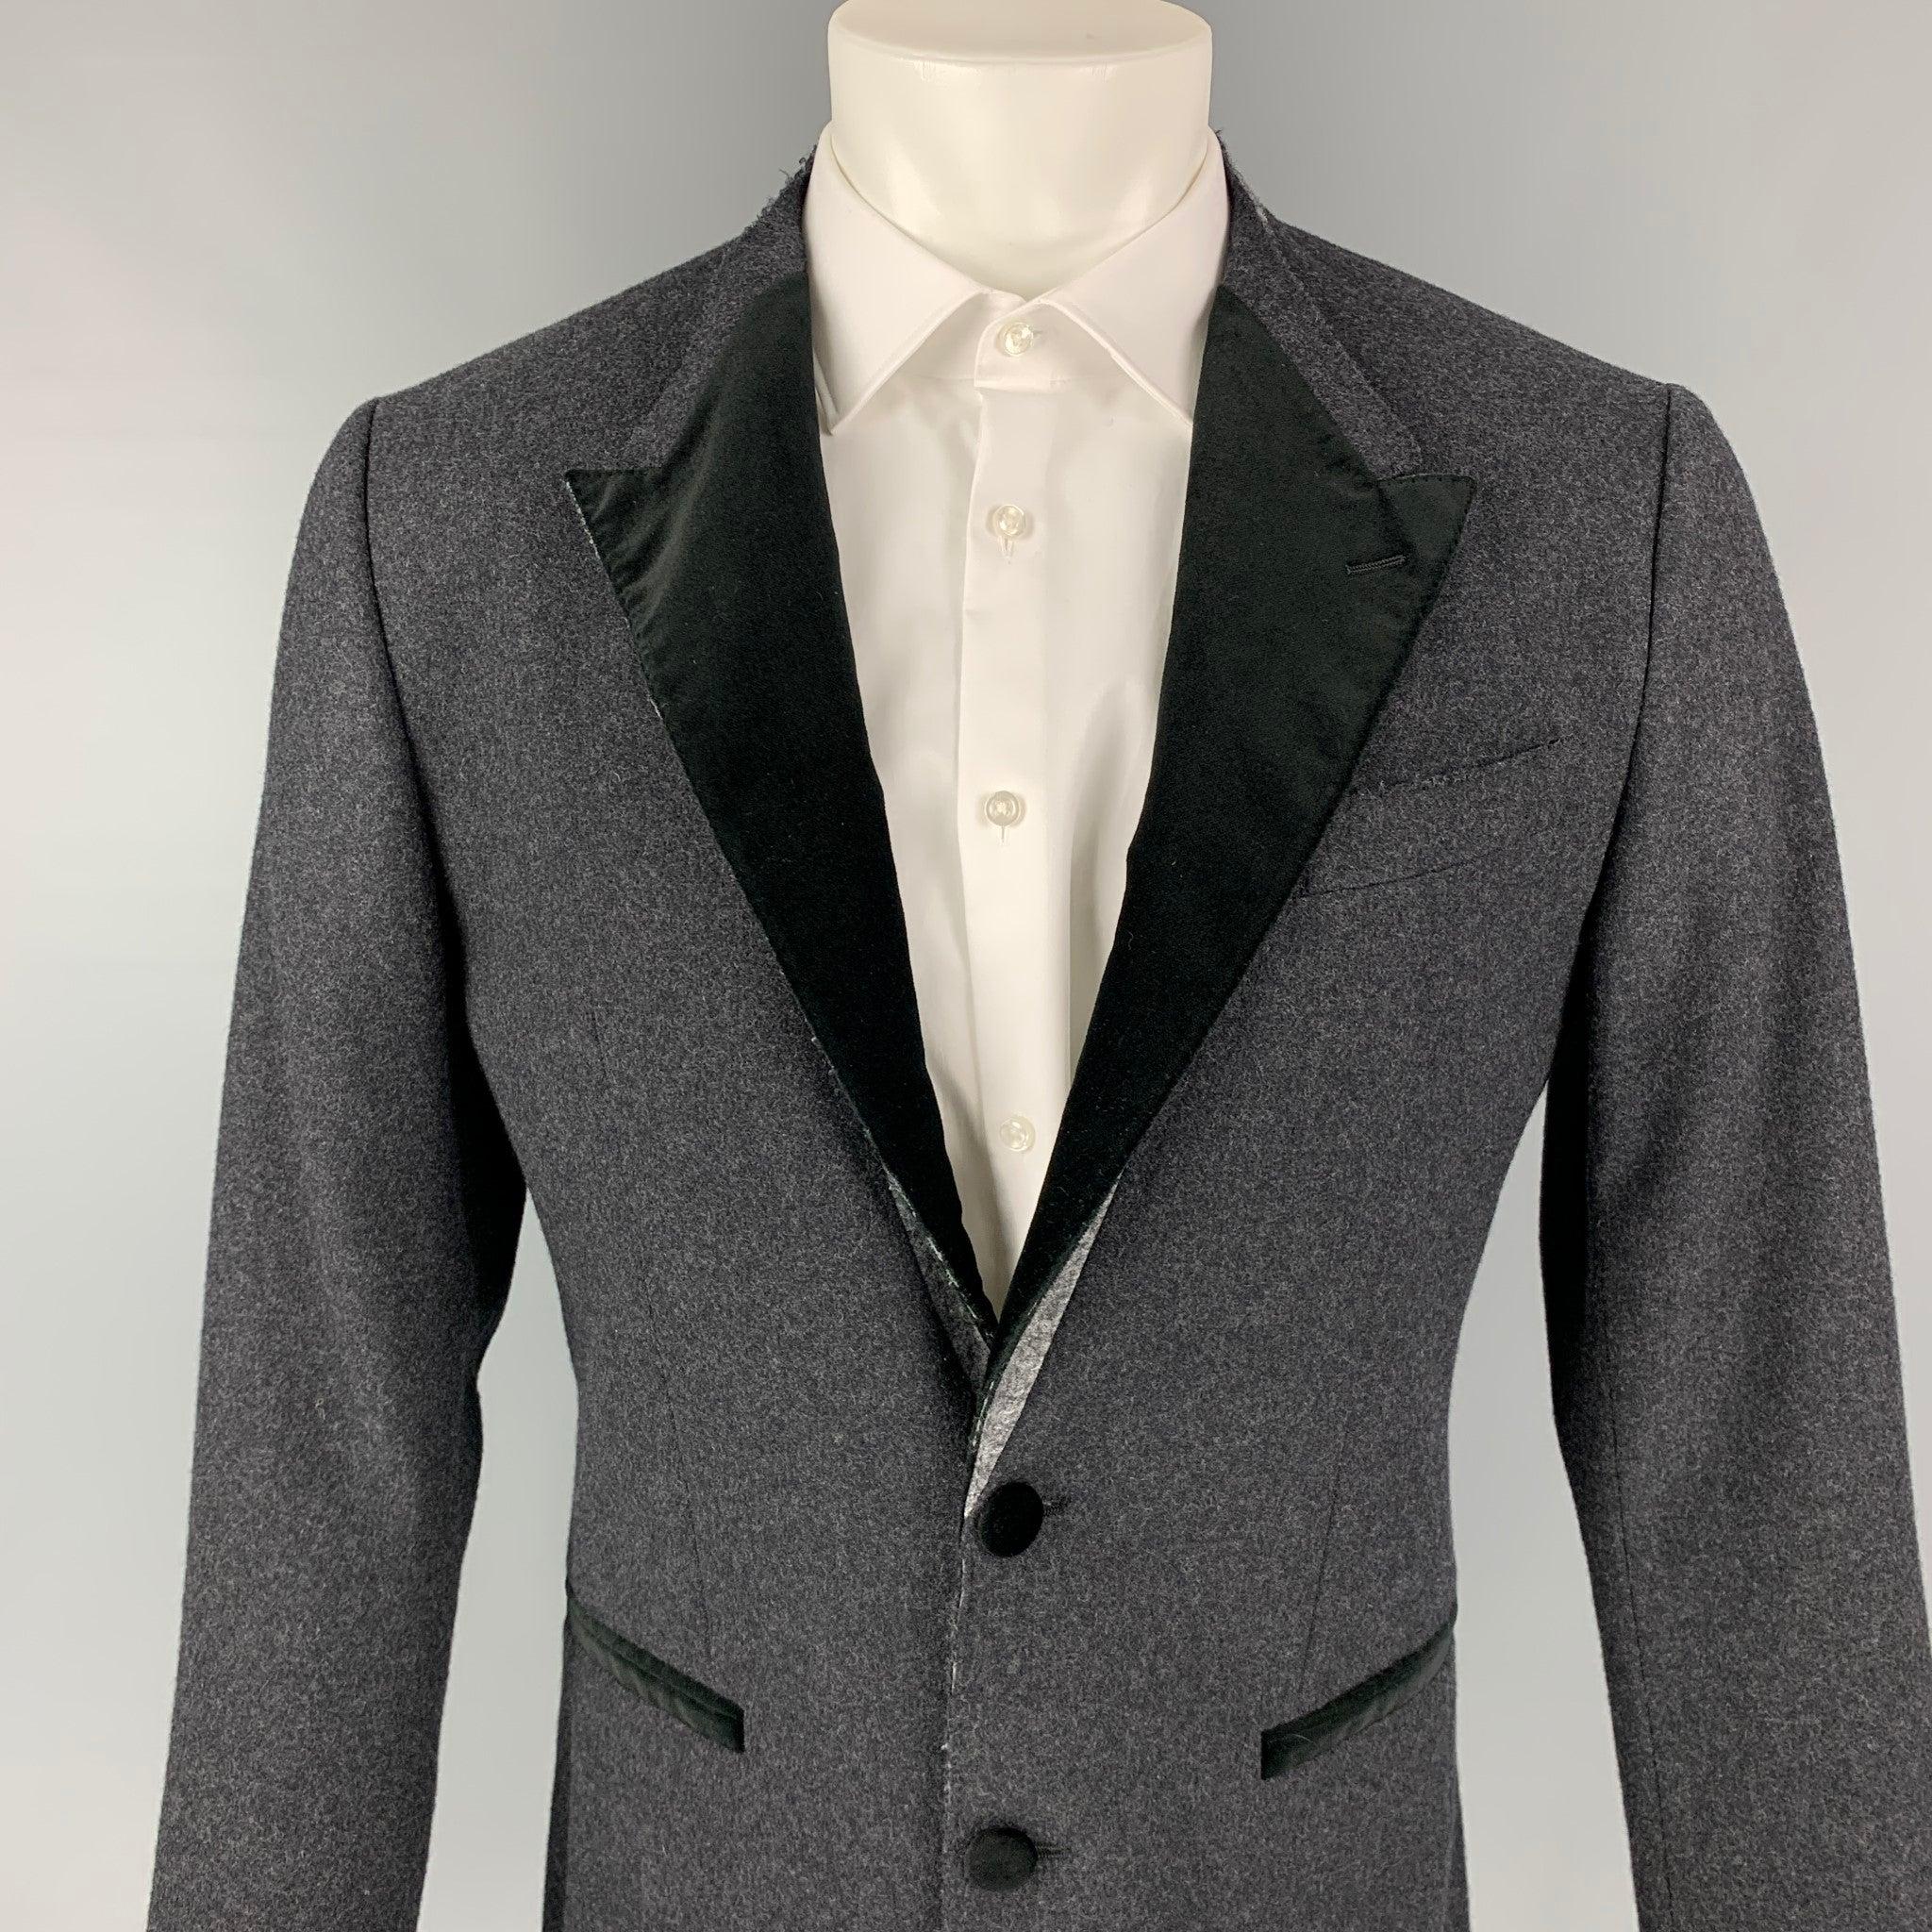 DOLCE & GABBANA sport coat comes in a charcoal & black wool blend with a half liner featuring a deconstructed lapel, slit pockets, double back vent, and a double button closure. Made in Italy.
Excellent
Pre-Owned Condition.  

Marked:   46